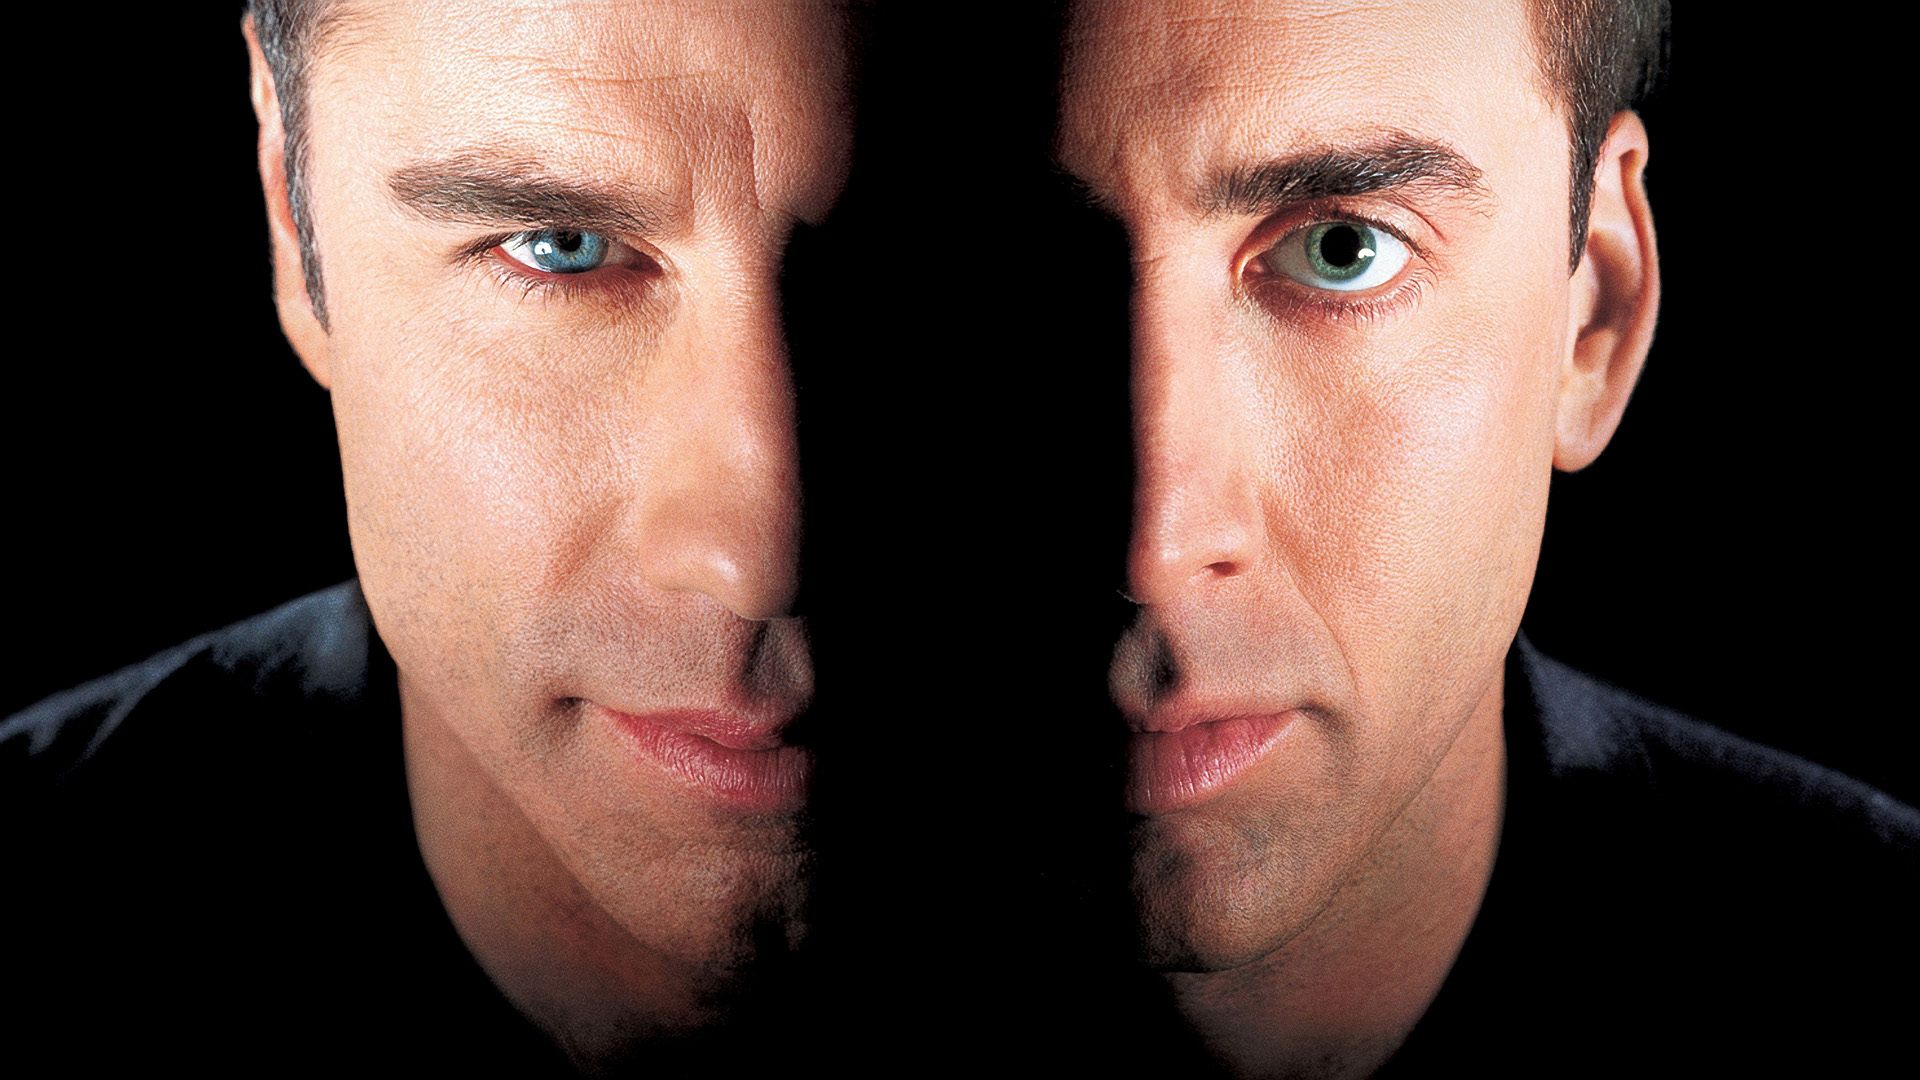 Face/Off background